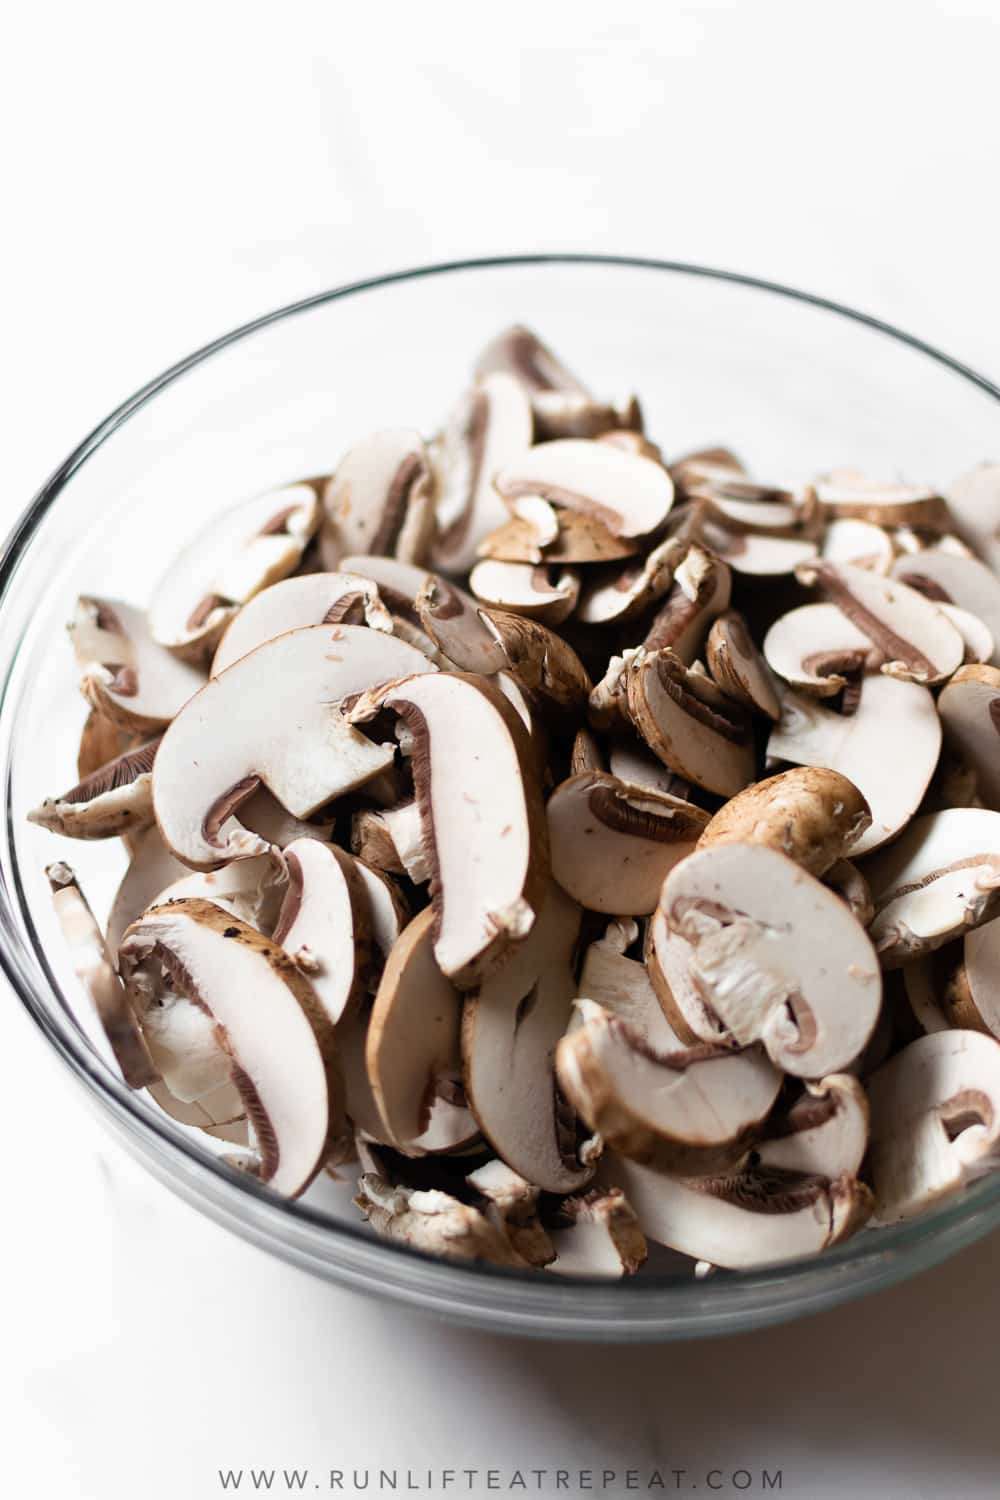 sliced mushrooms in a bowl on table